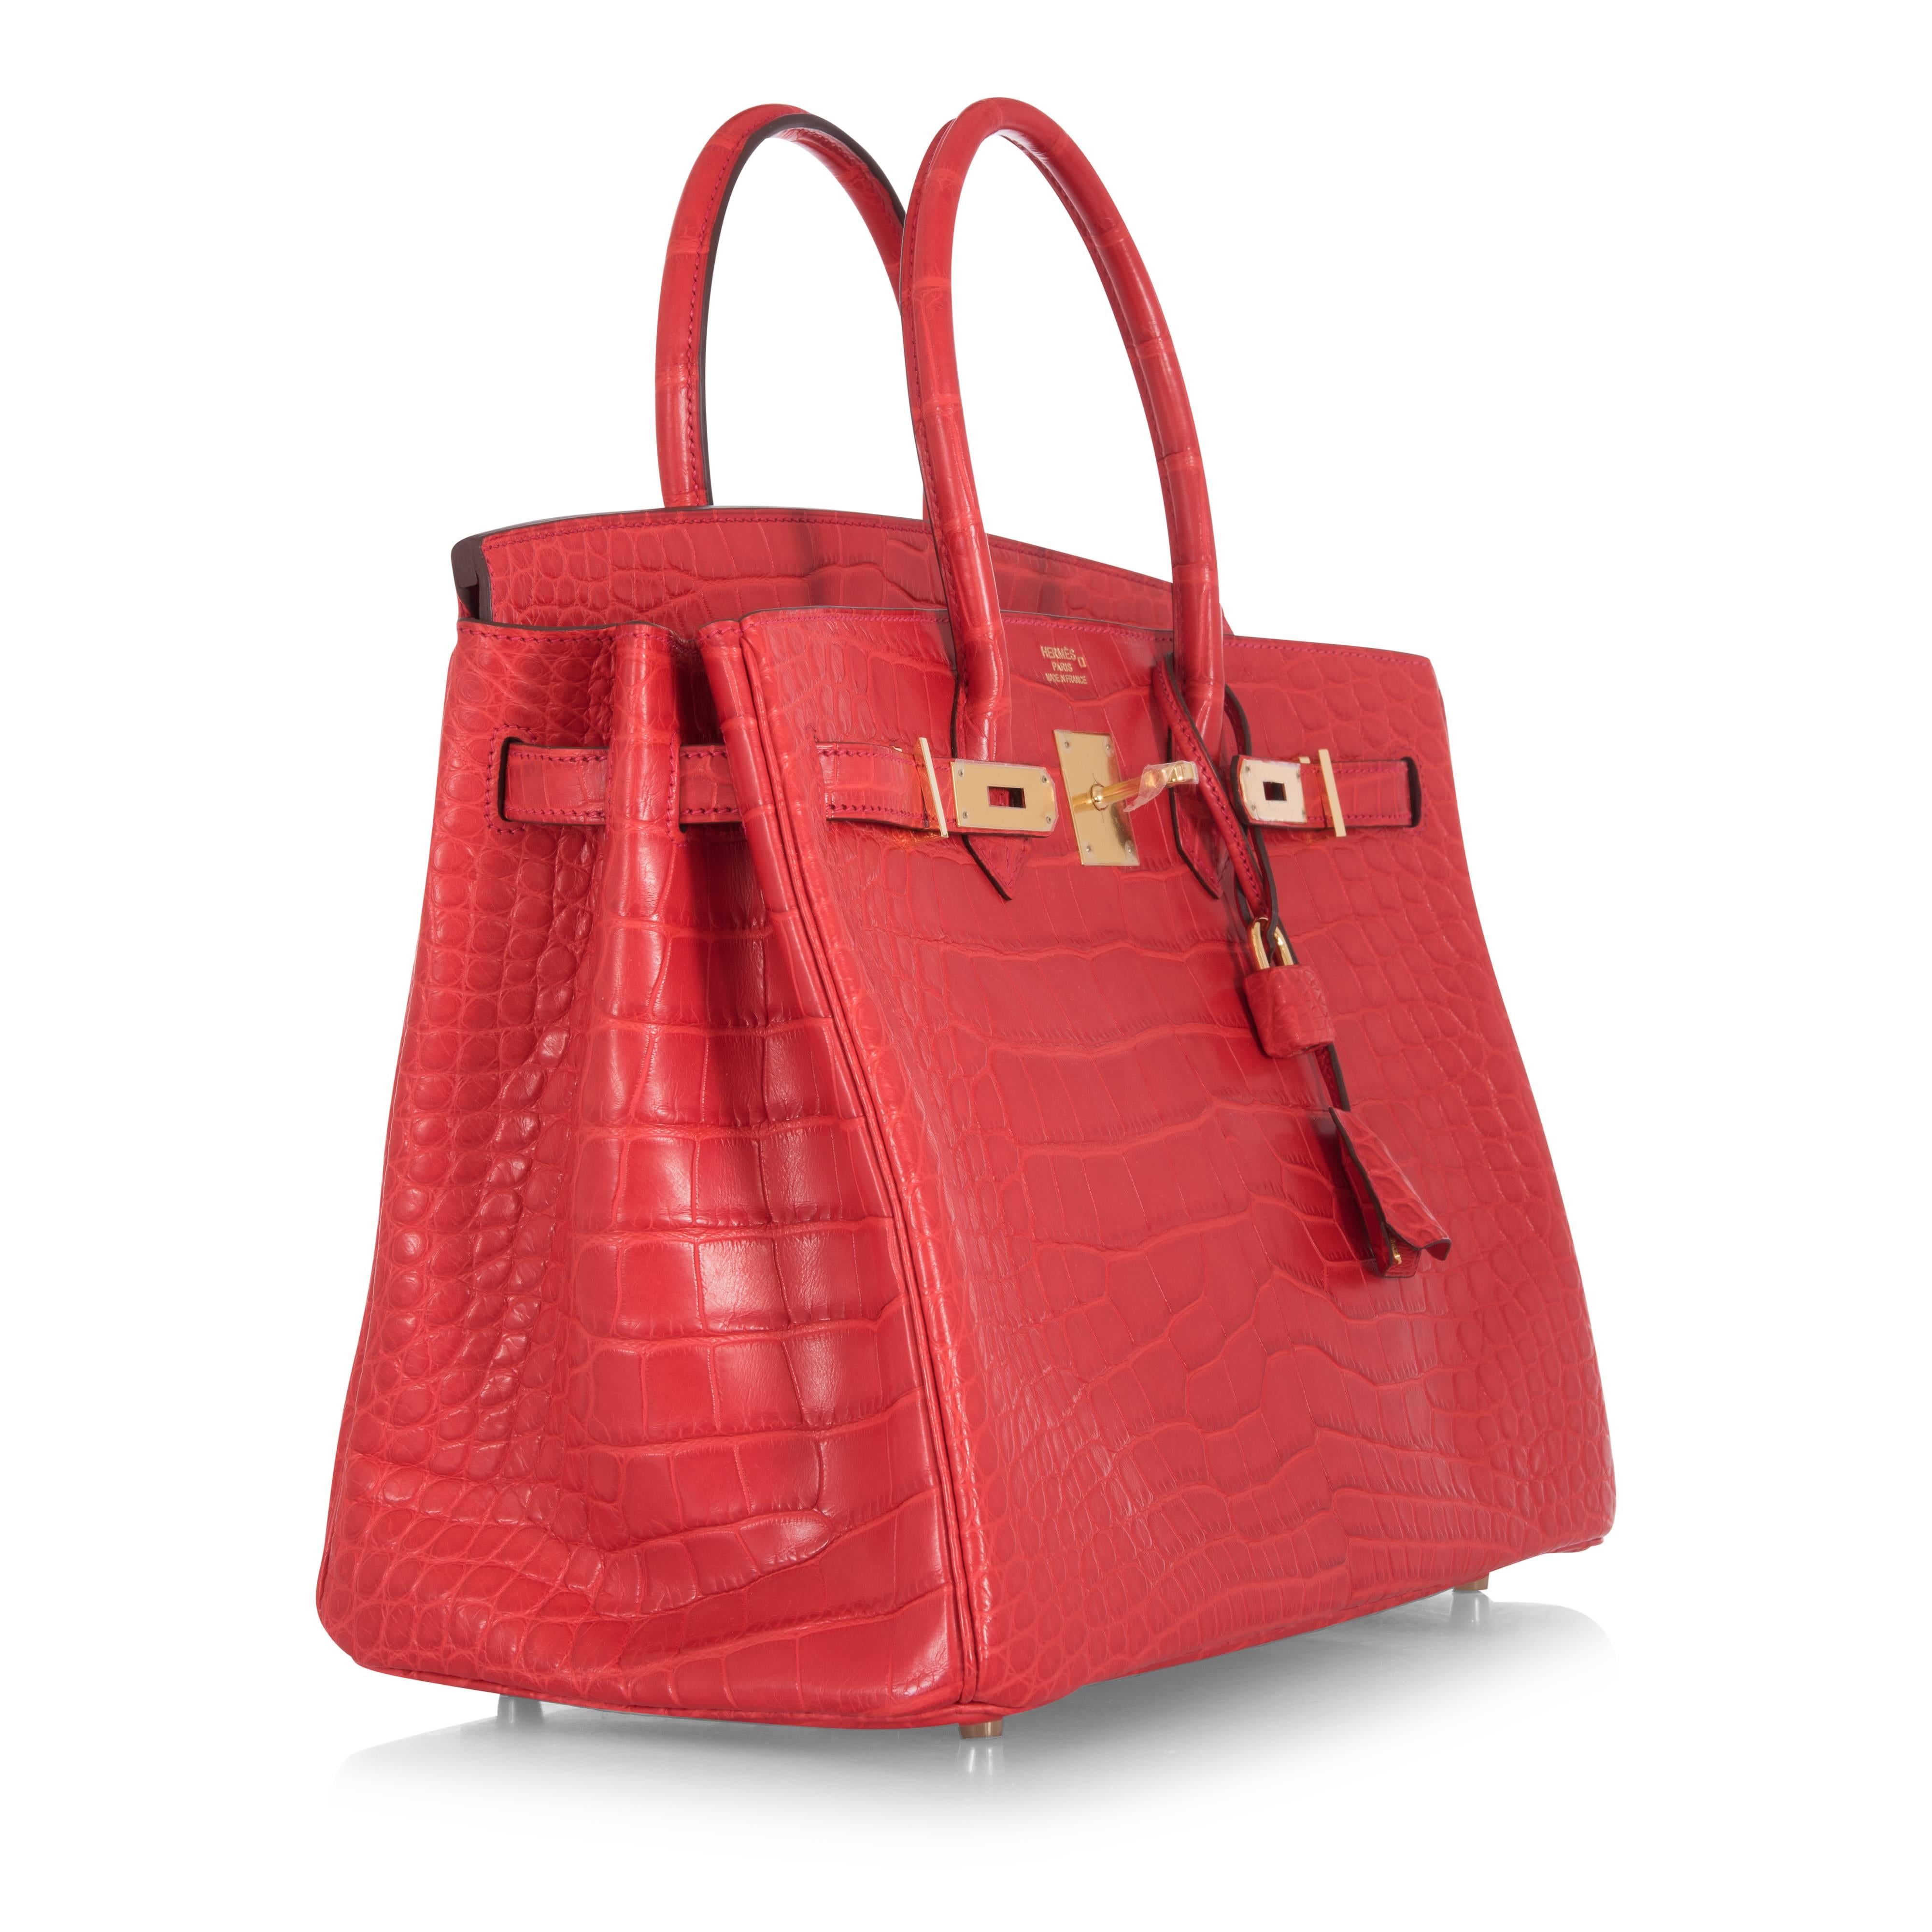 Hermes 35cm Birkin Bag Geranium Red Matte Alligator With Insane Gold Hardware In New Condition For Sale In NYC Tri-State/Miami, NY